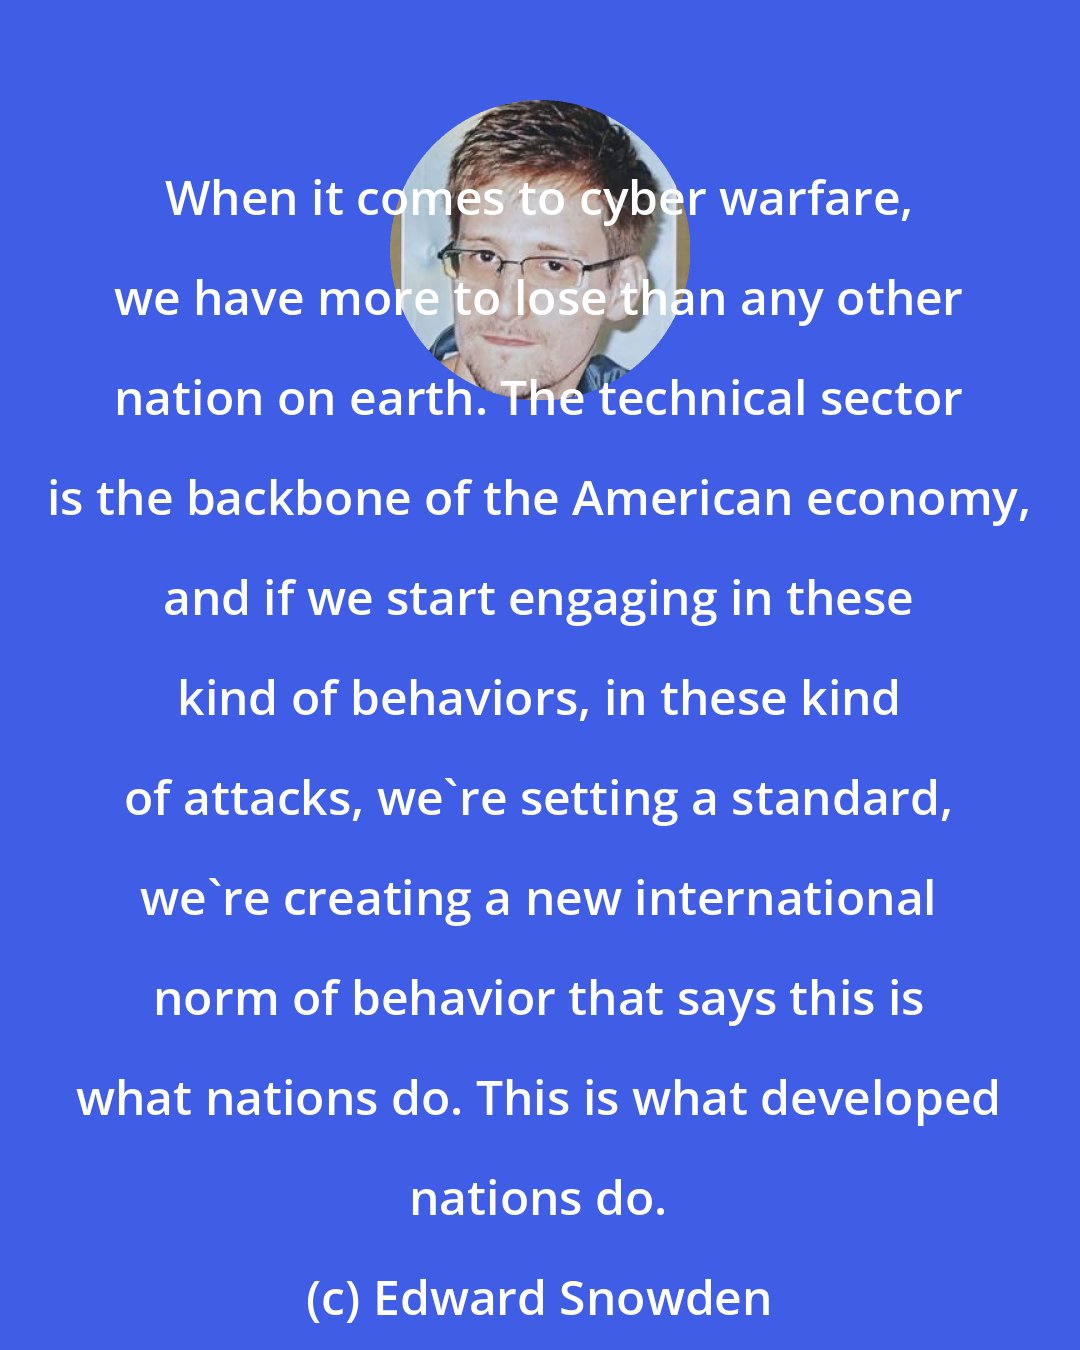 Edward Snowden: When it comes to cyber warfare, we have more to lose than any other nation on earth. The technical sector is the backbone of the American economy, and if we start engaging in these kind of behaviors, in these kind of attacks, we're setting a standard, we're creating a new international norm of behavior that says this is what nations do. This is what developed nations do.